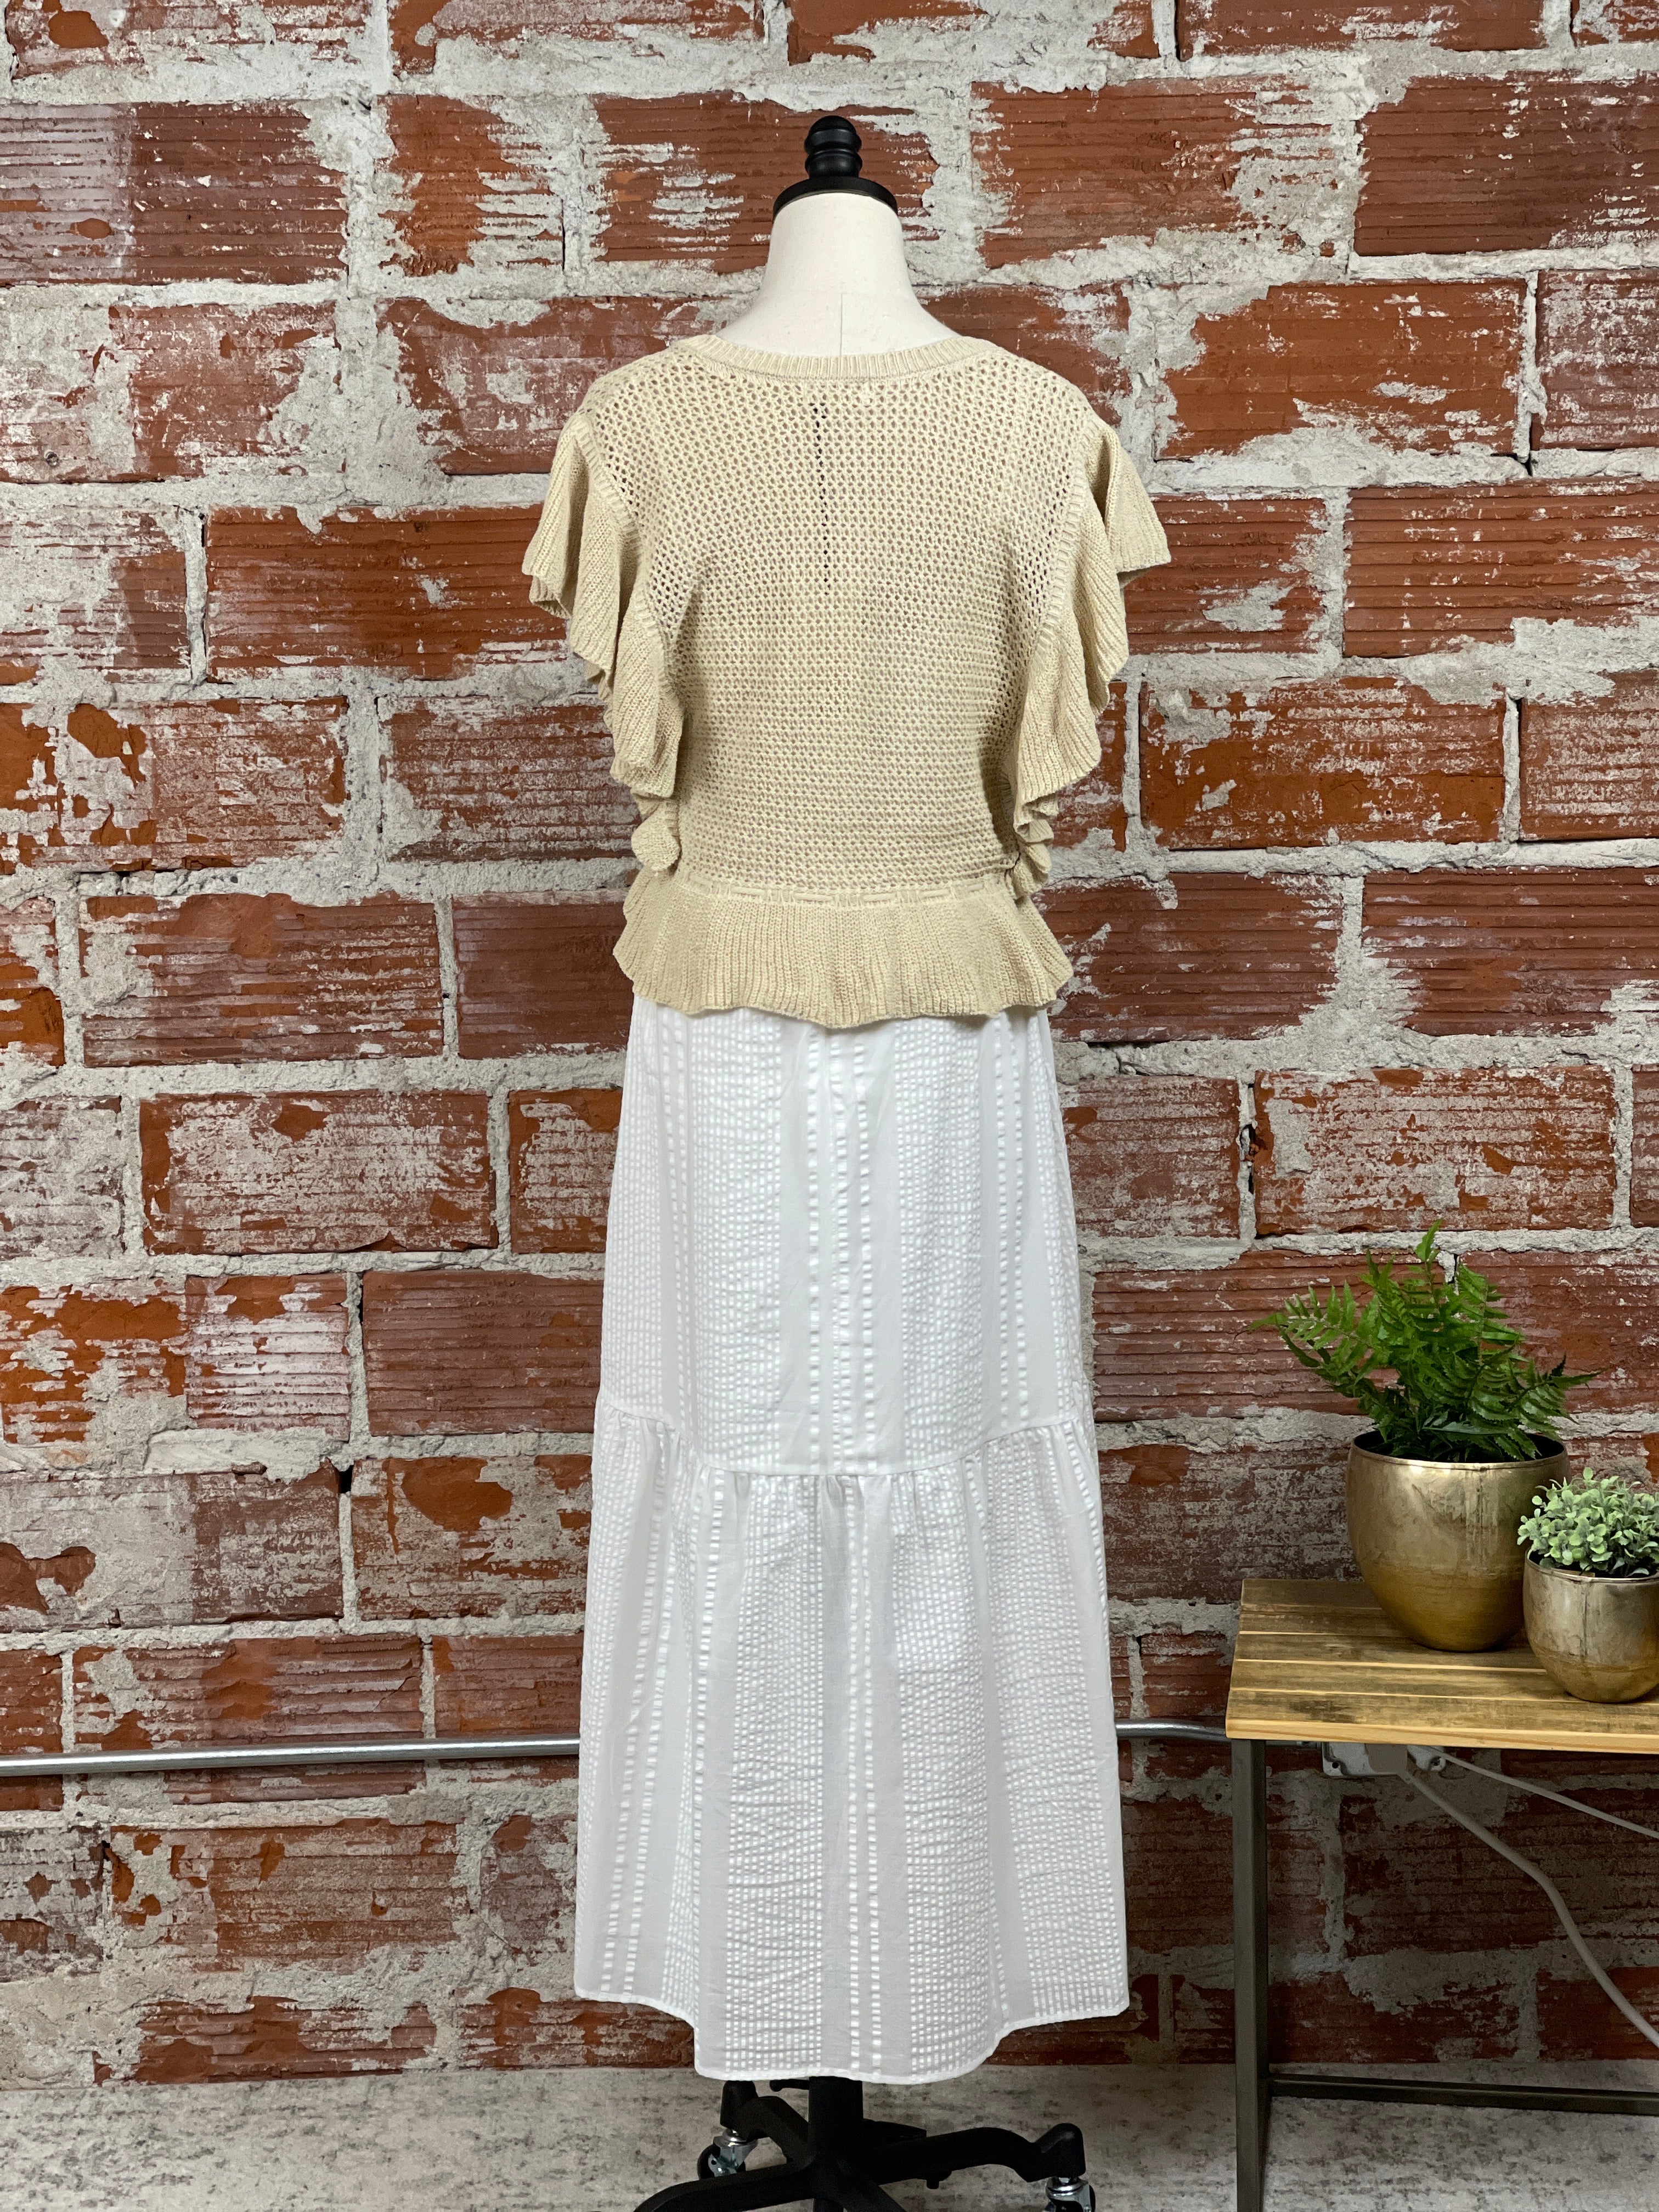 Elan Summer Maxi Dress With Knit Top Set in White and Beige-152 Dresses - Long-Little Bird Boutique